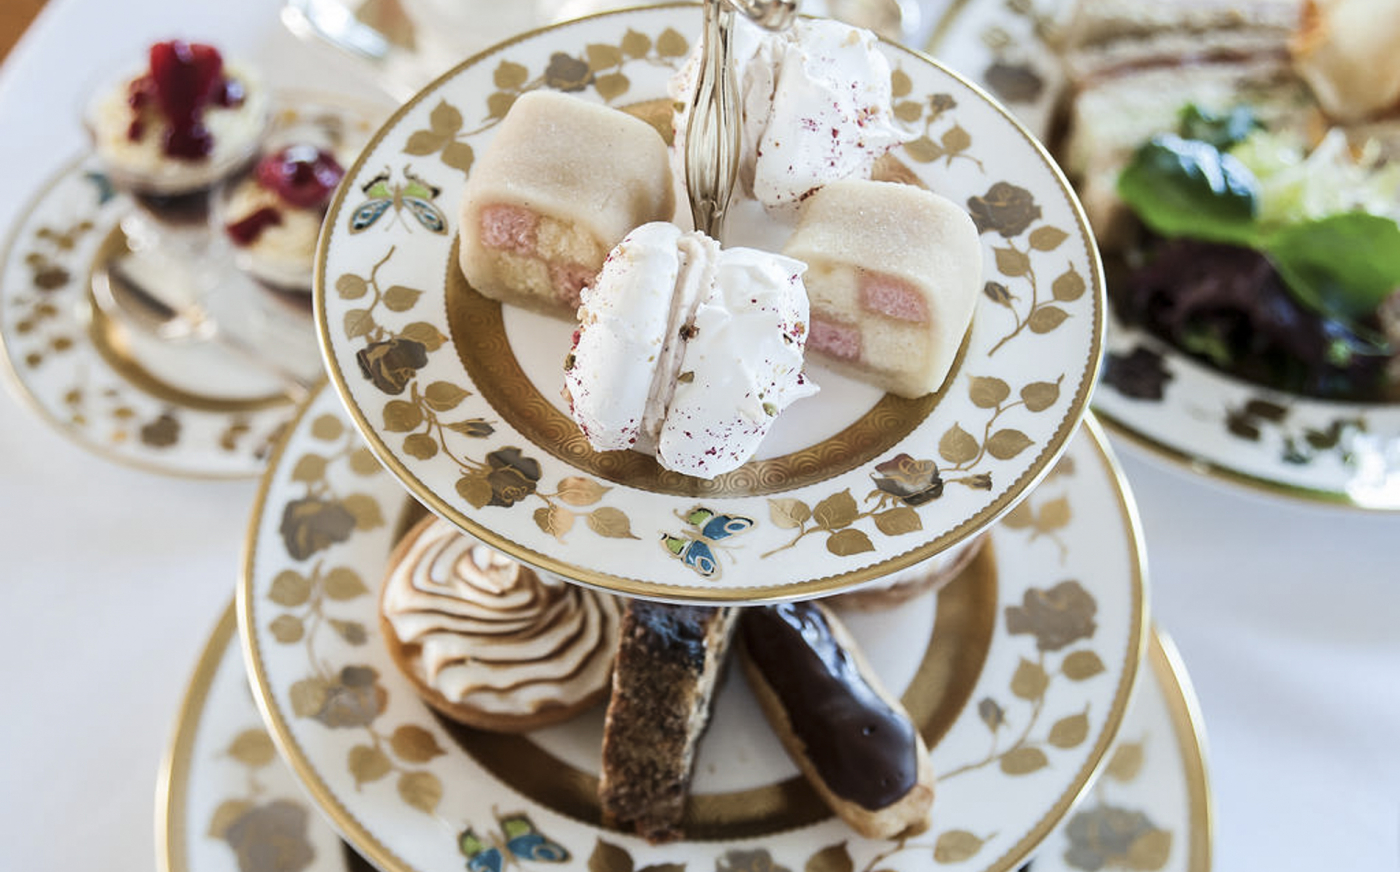 How to have afternoon tea when you hate it